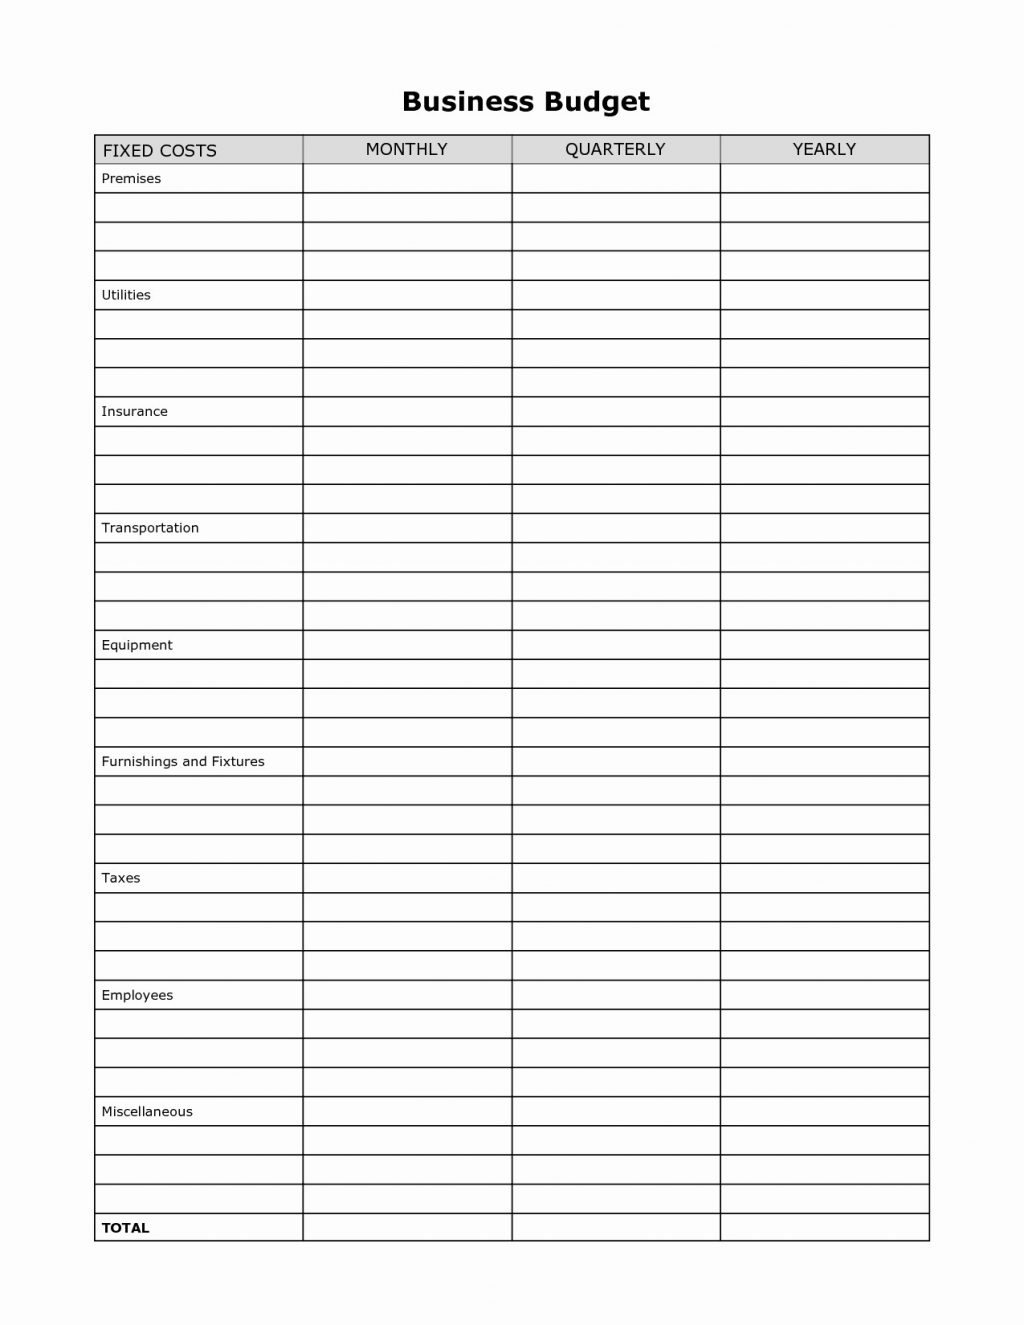 Expenses For Self Employed Spreadsheet Regarding Self Employed Expense Sheet Sample Worksheets Tax Employment